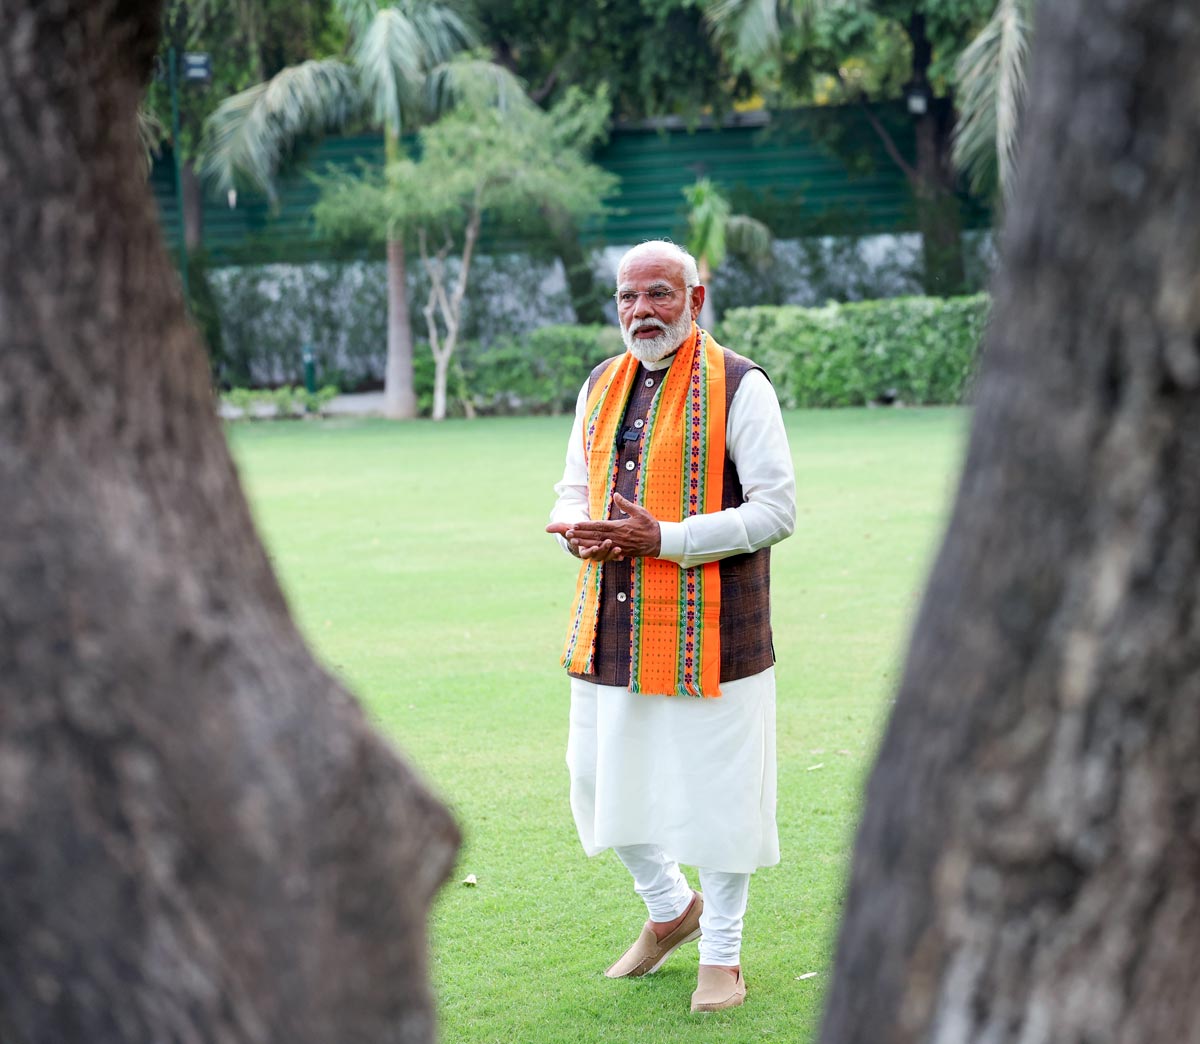 Ahead of LS poll results, Modi to meditatefor 24 hrs